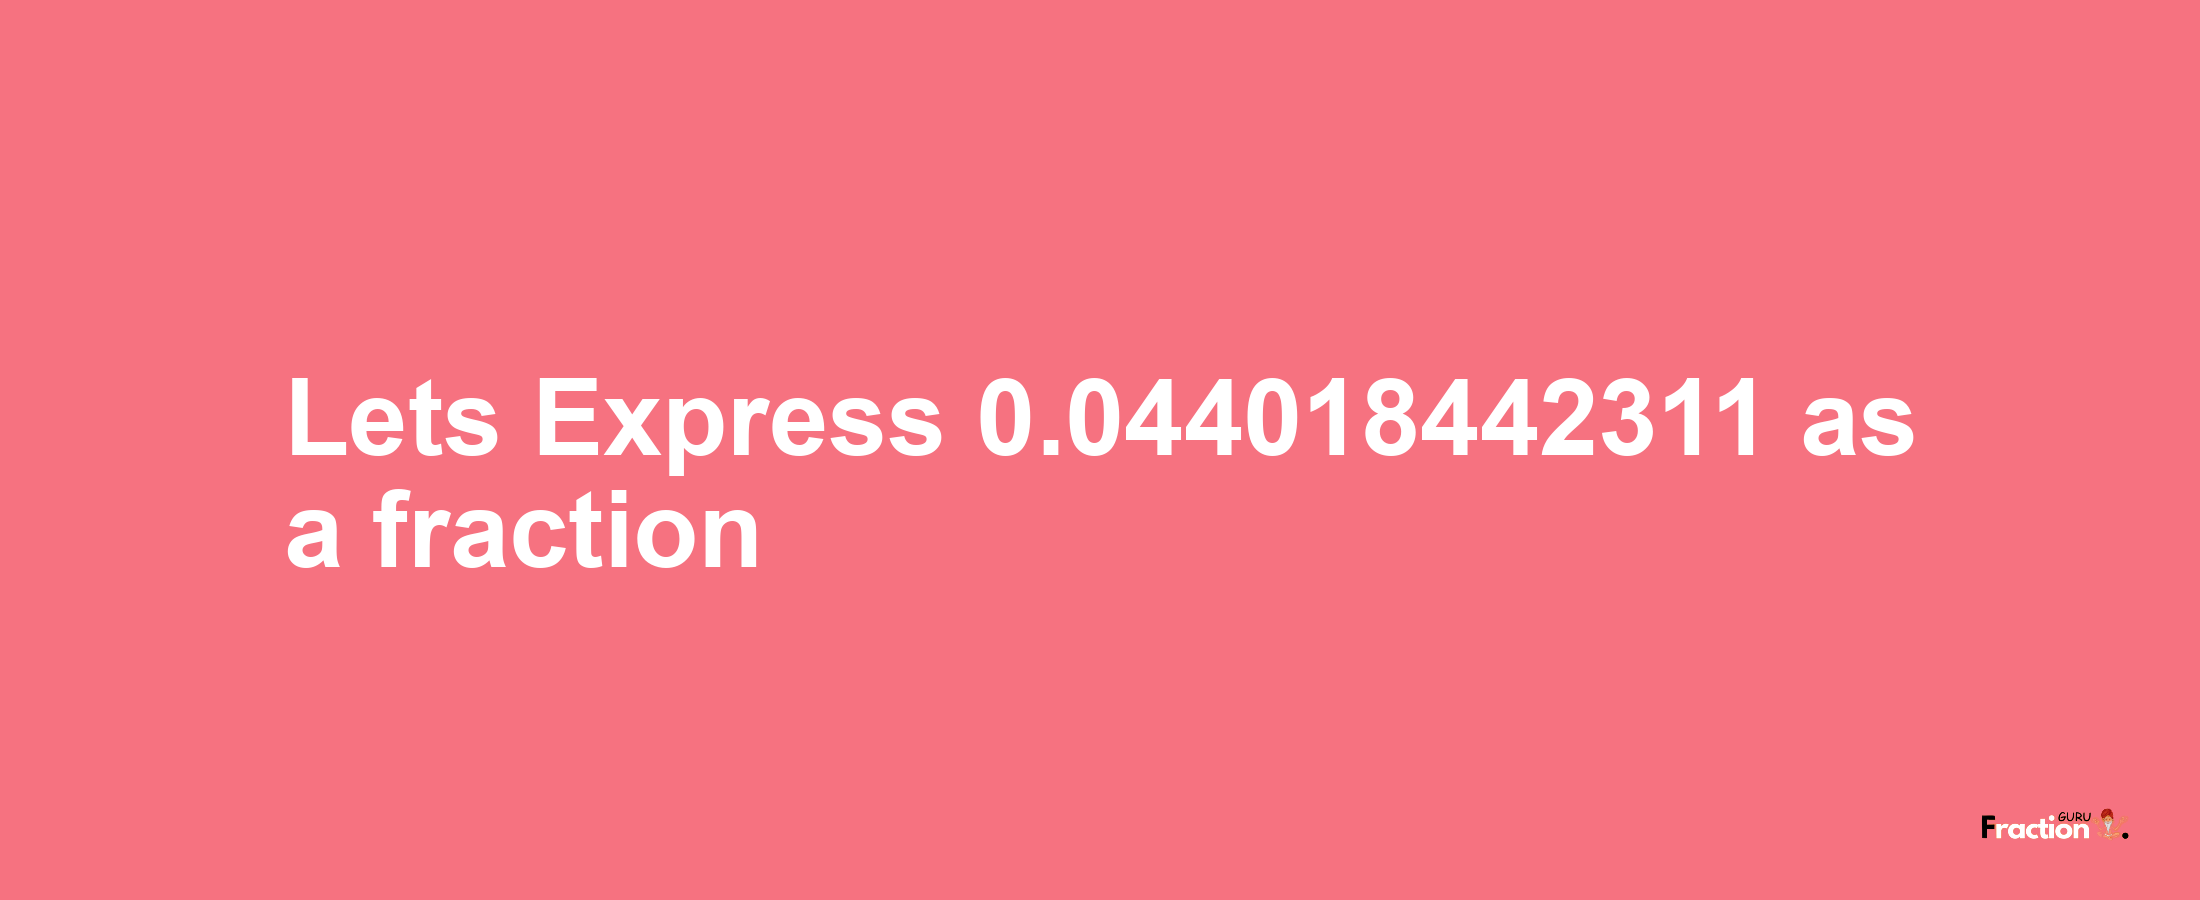 Lets Express 0.044018442311 as afraction